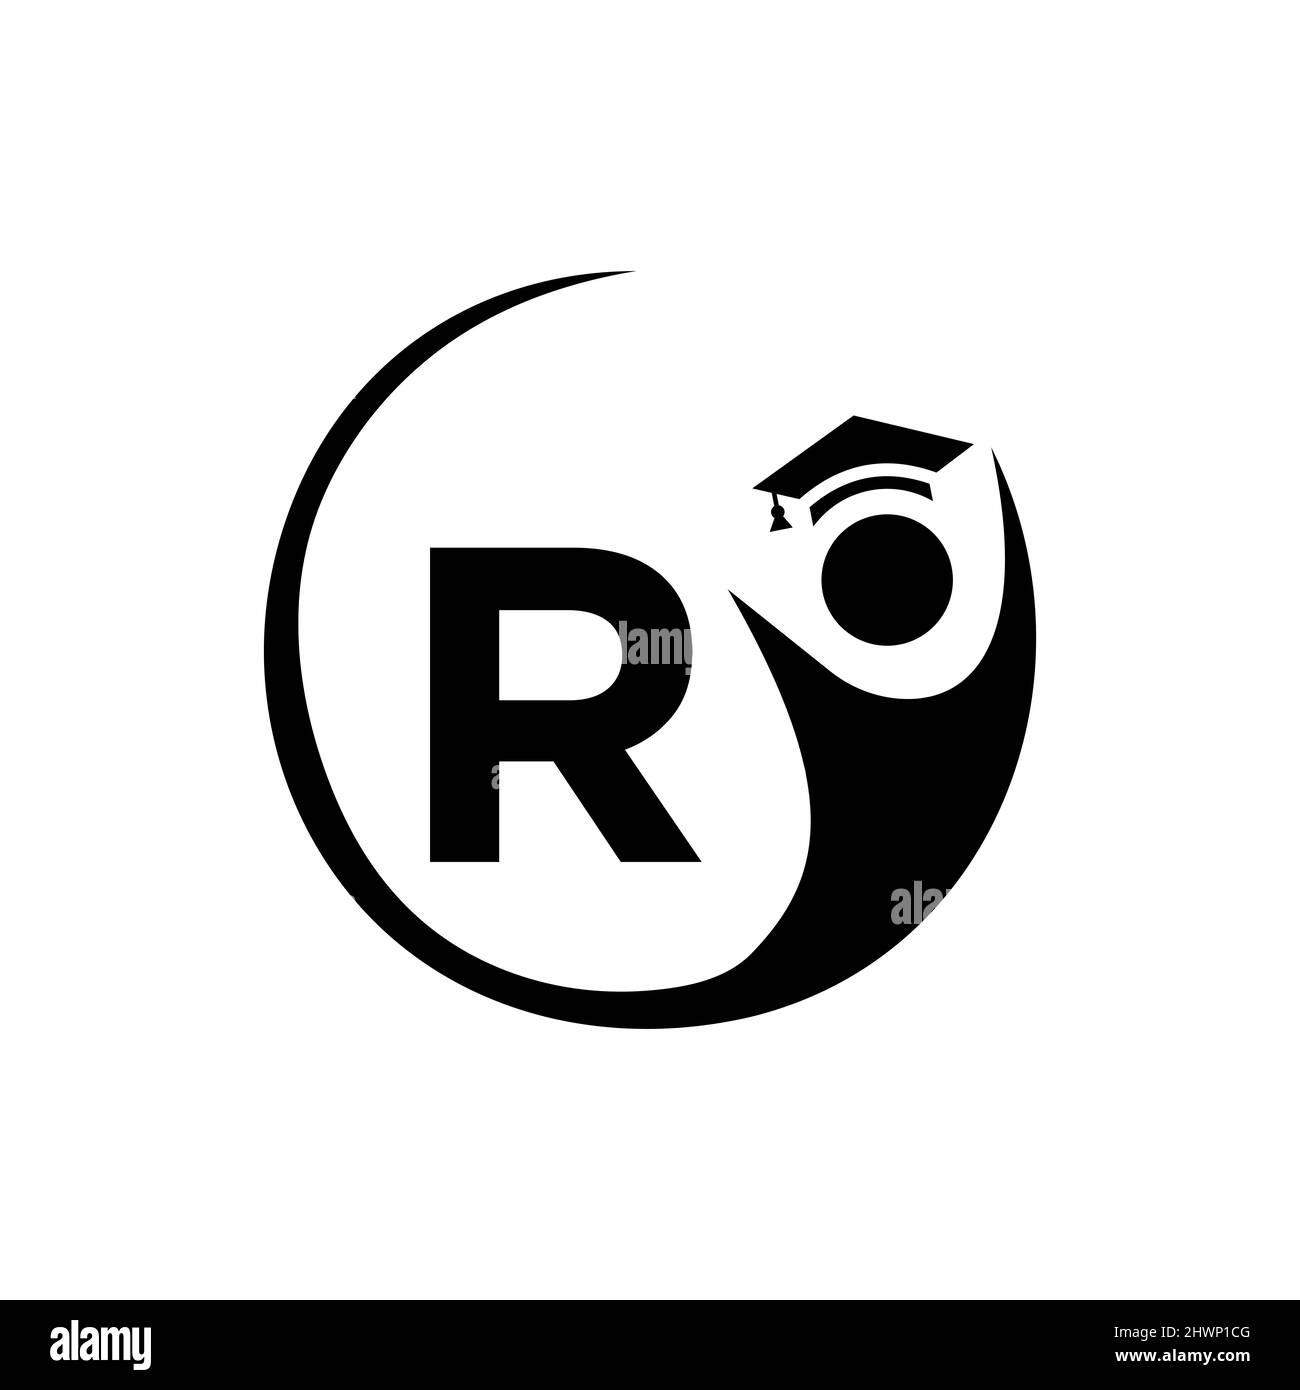 Letter R Education Logo Template. Education Logo On R Letter, Initial Education Hat Concept Template Stock Vector